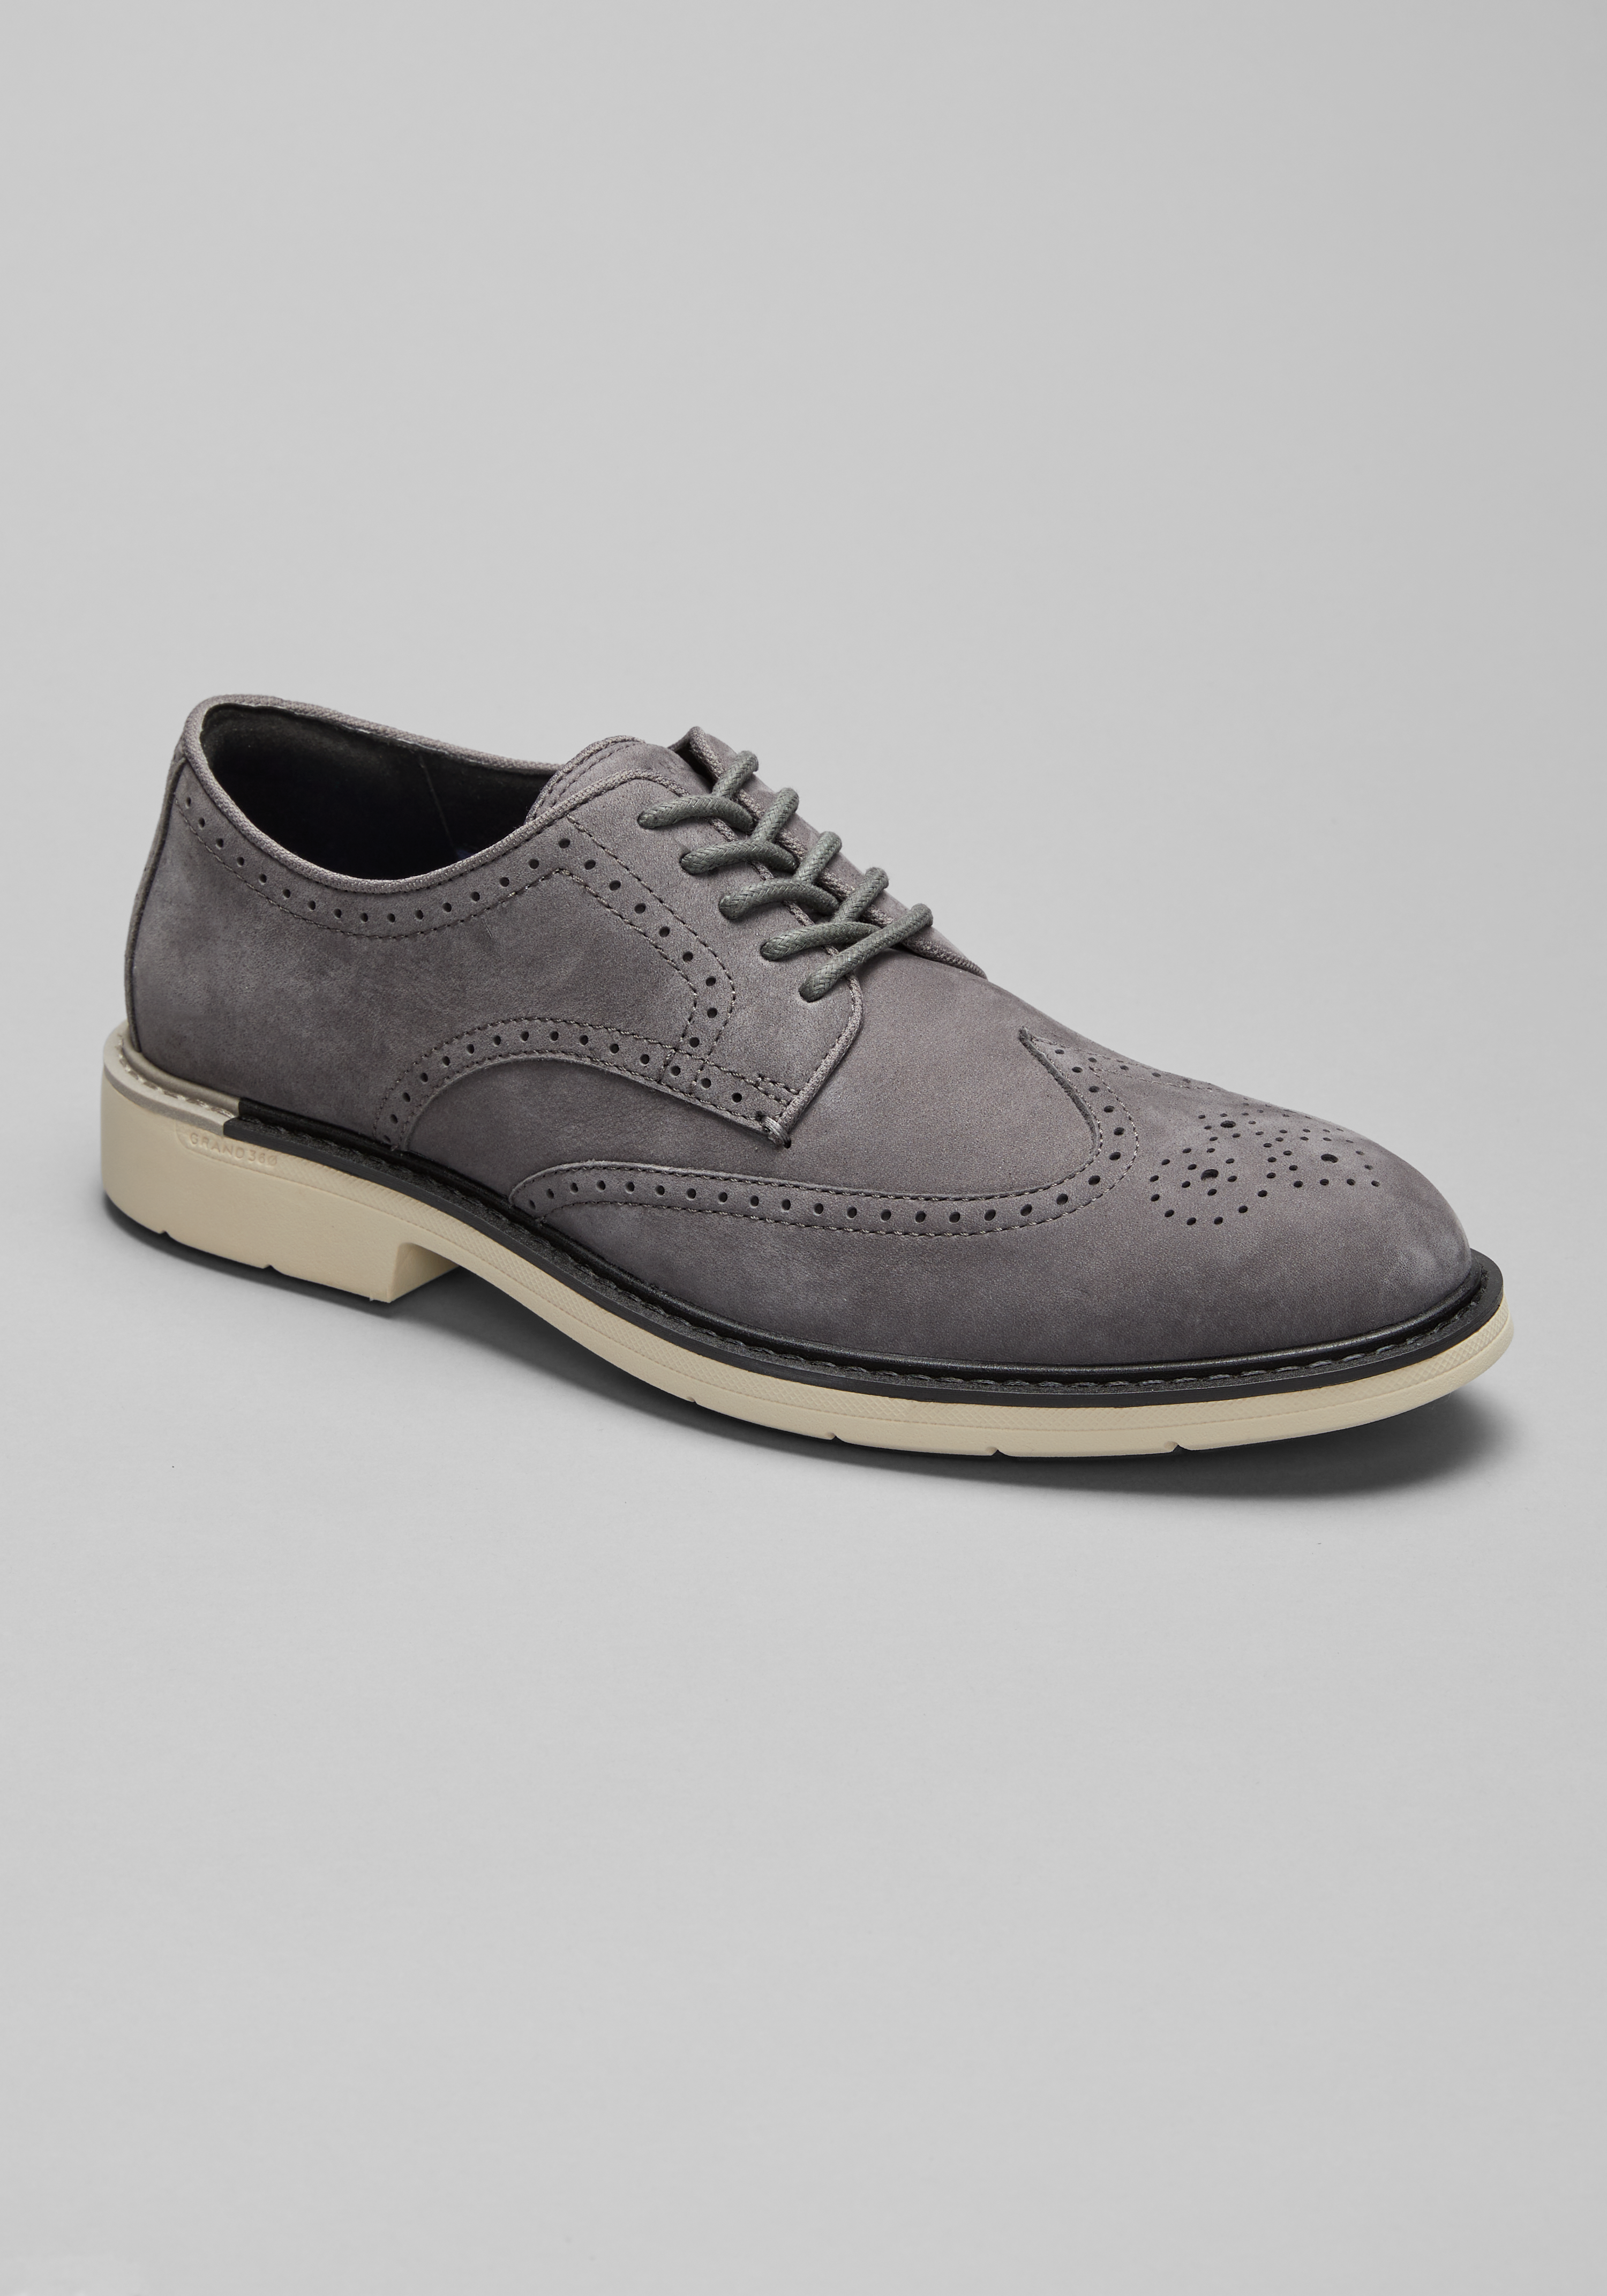 Cole Haan Go-To Wingtip Oxfords CLEARANCE - All Clearance | Jos A Bank